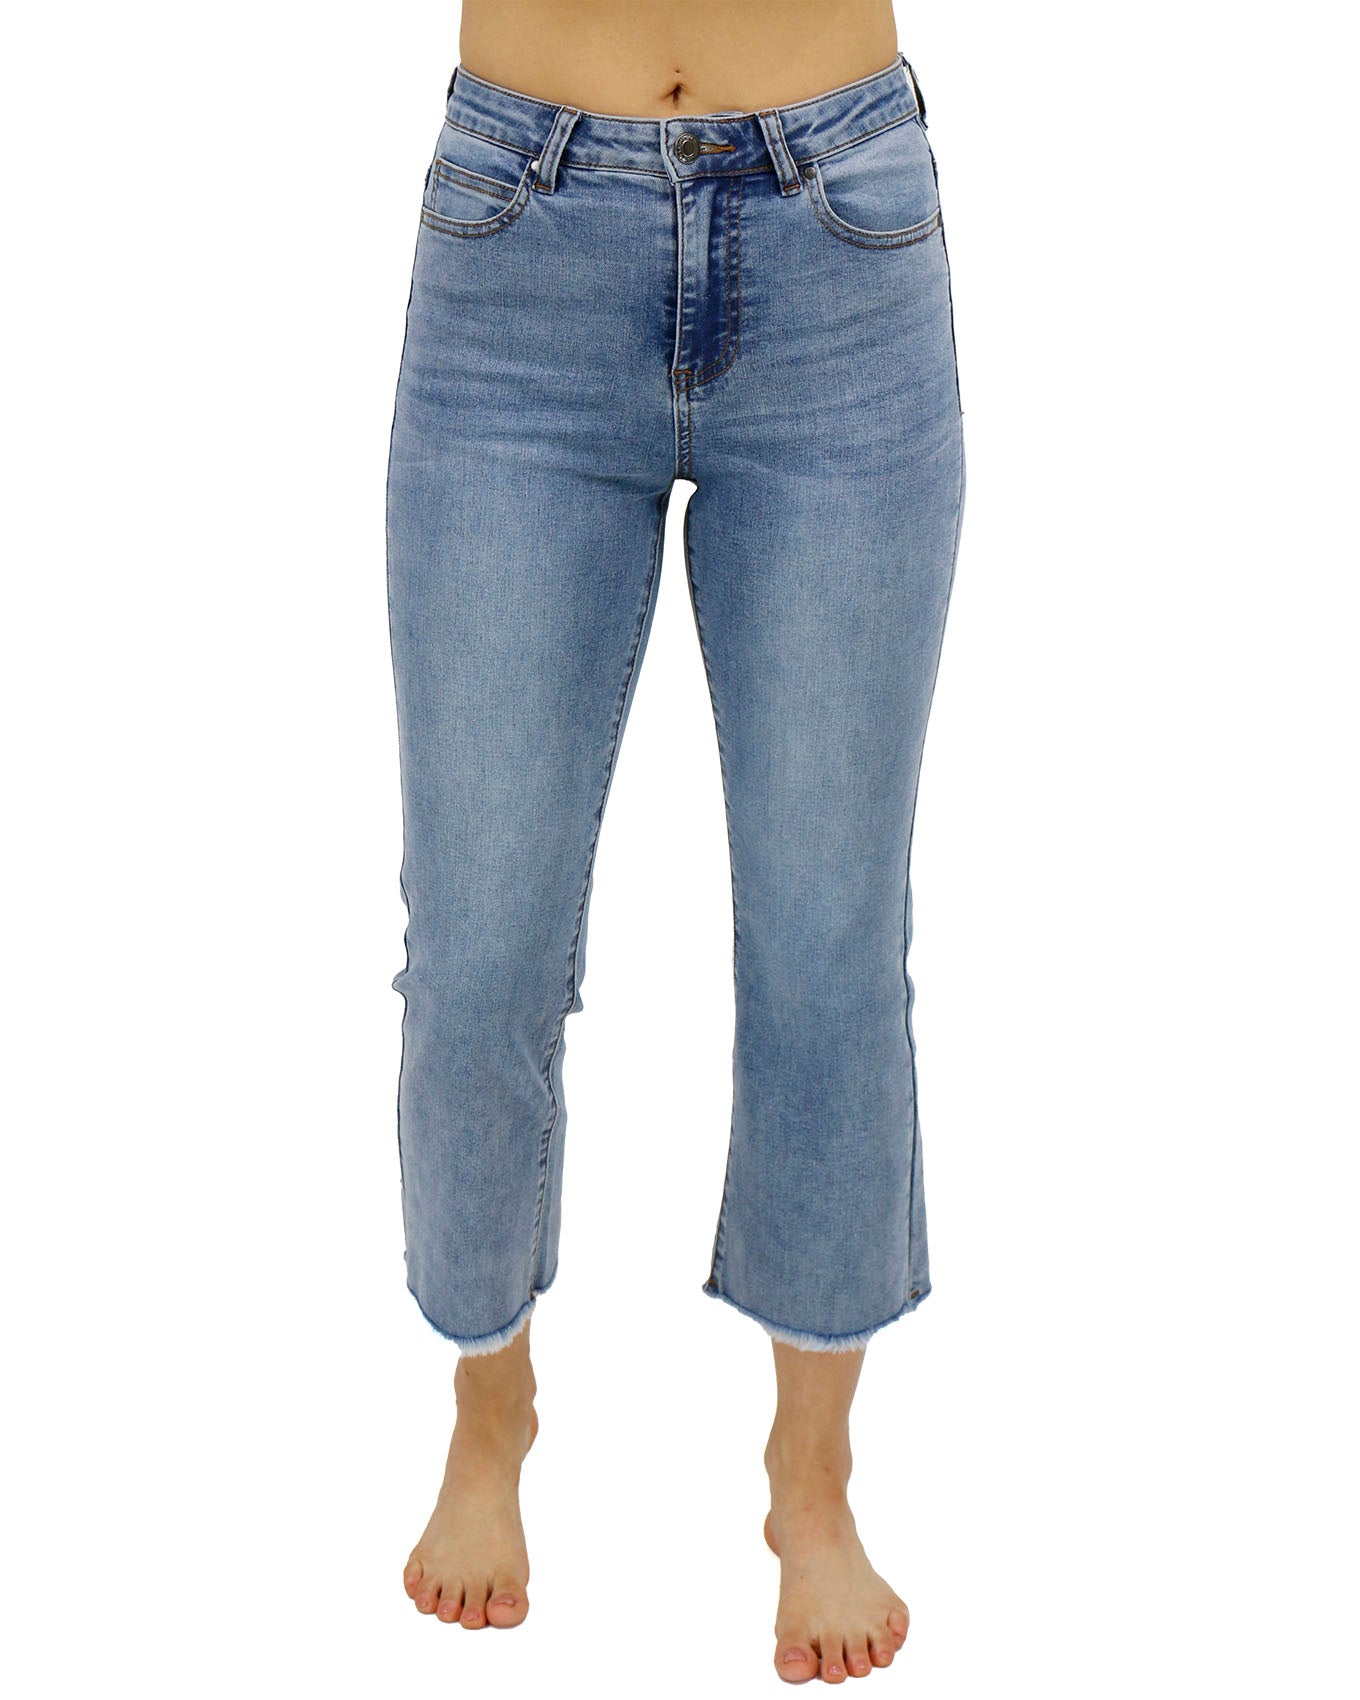 Women's cropped flared jeans with medium wash